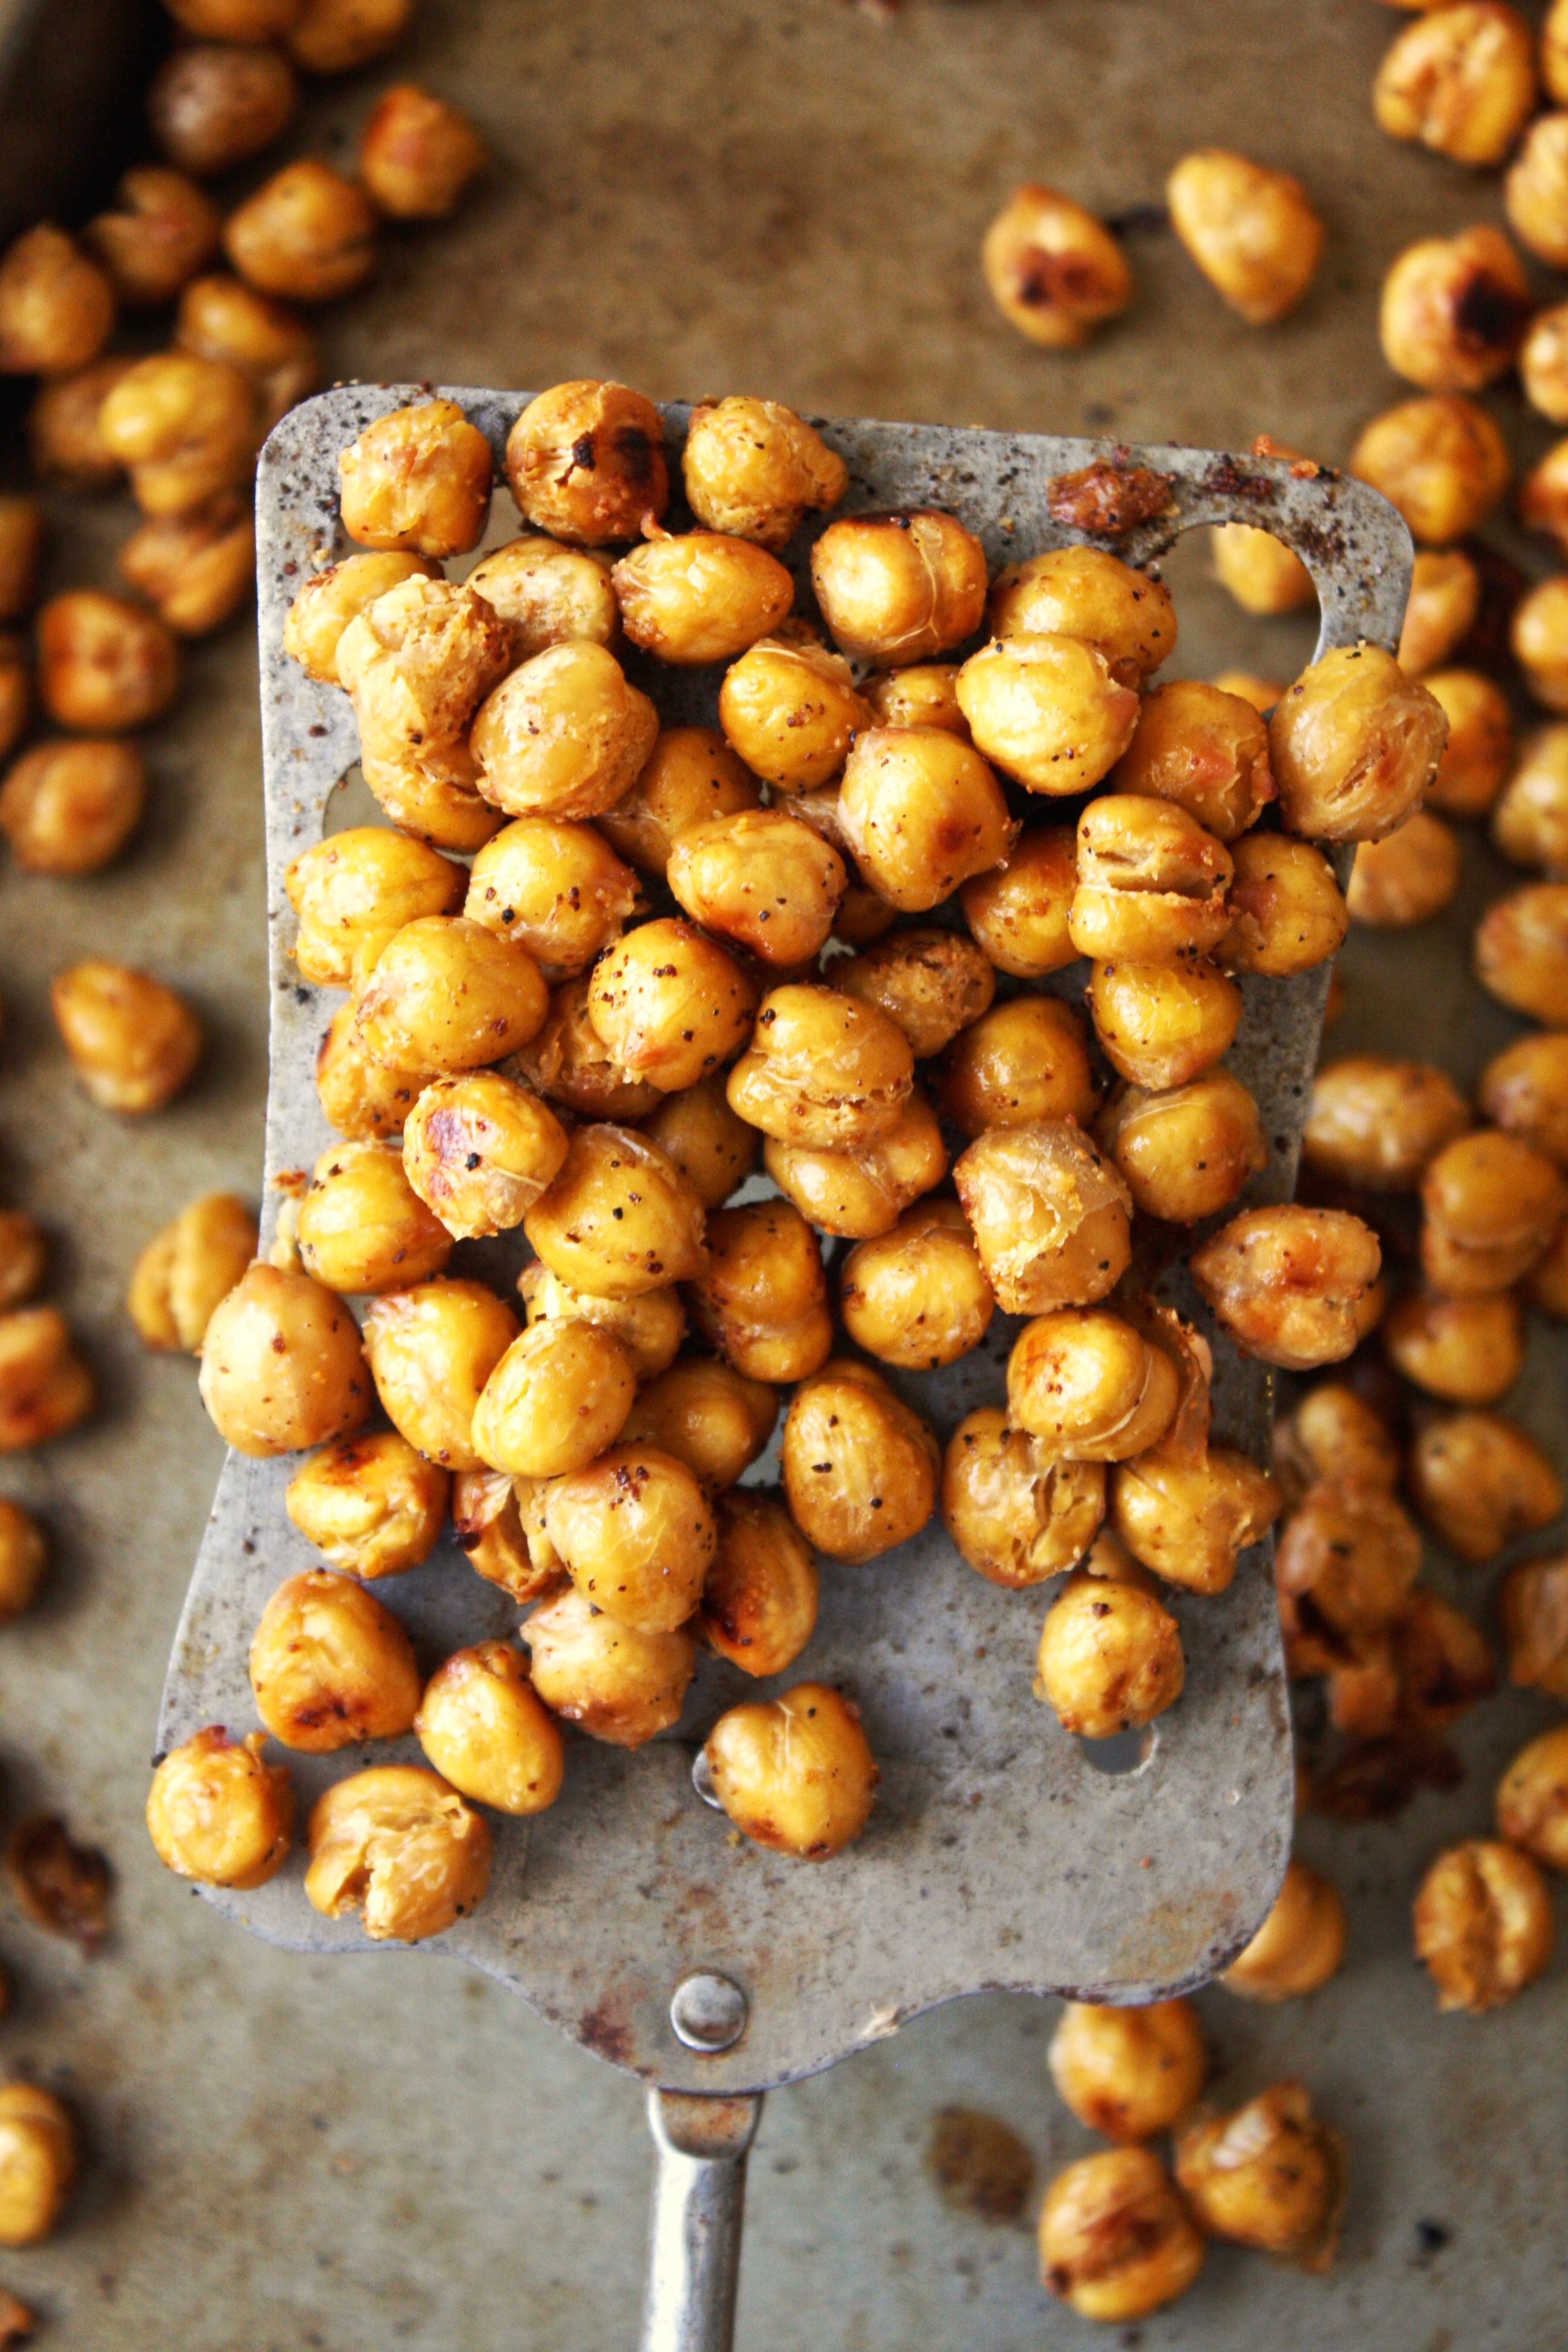 Chickpeas: Cooking them to enjoy their benefits